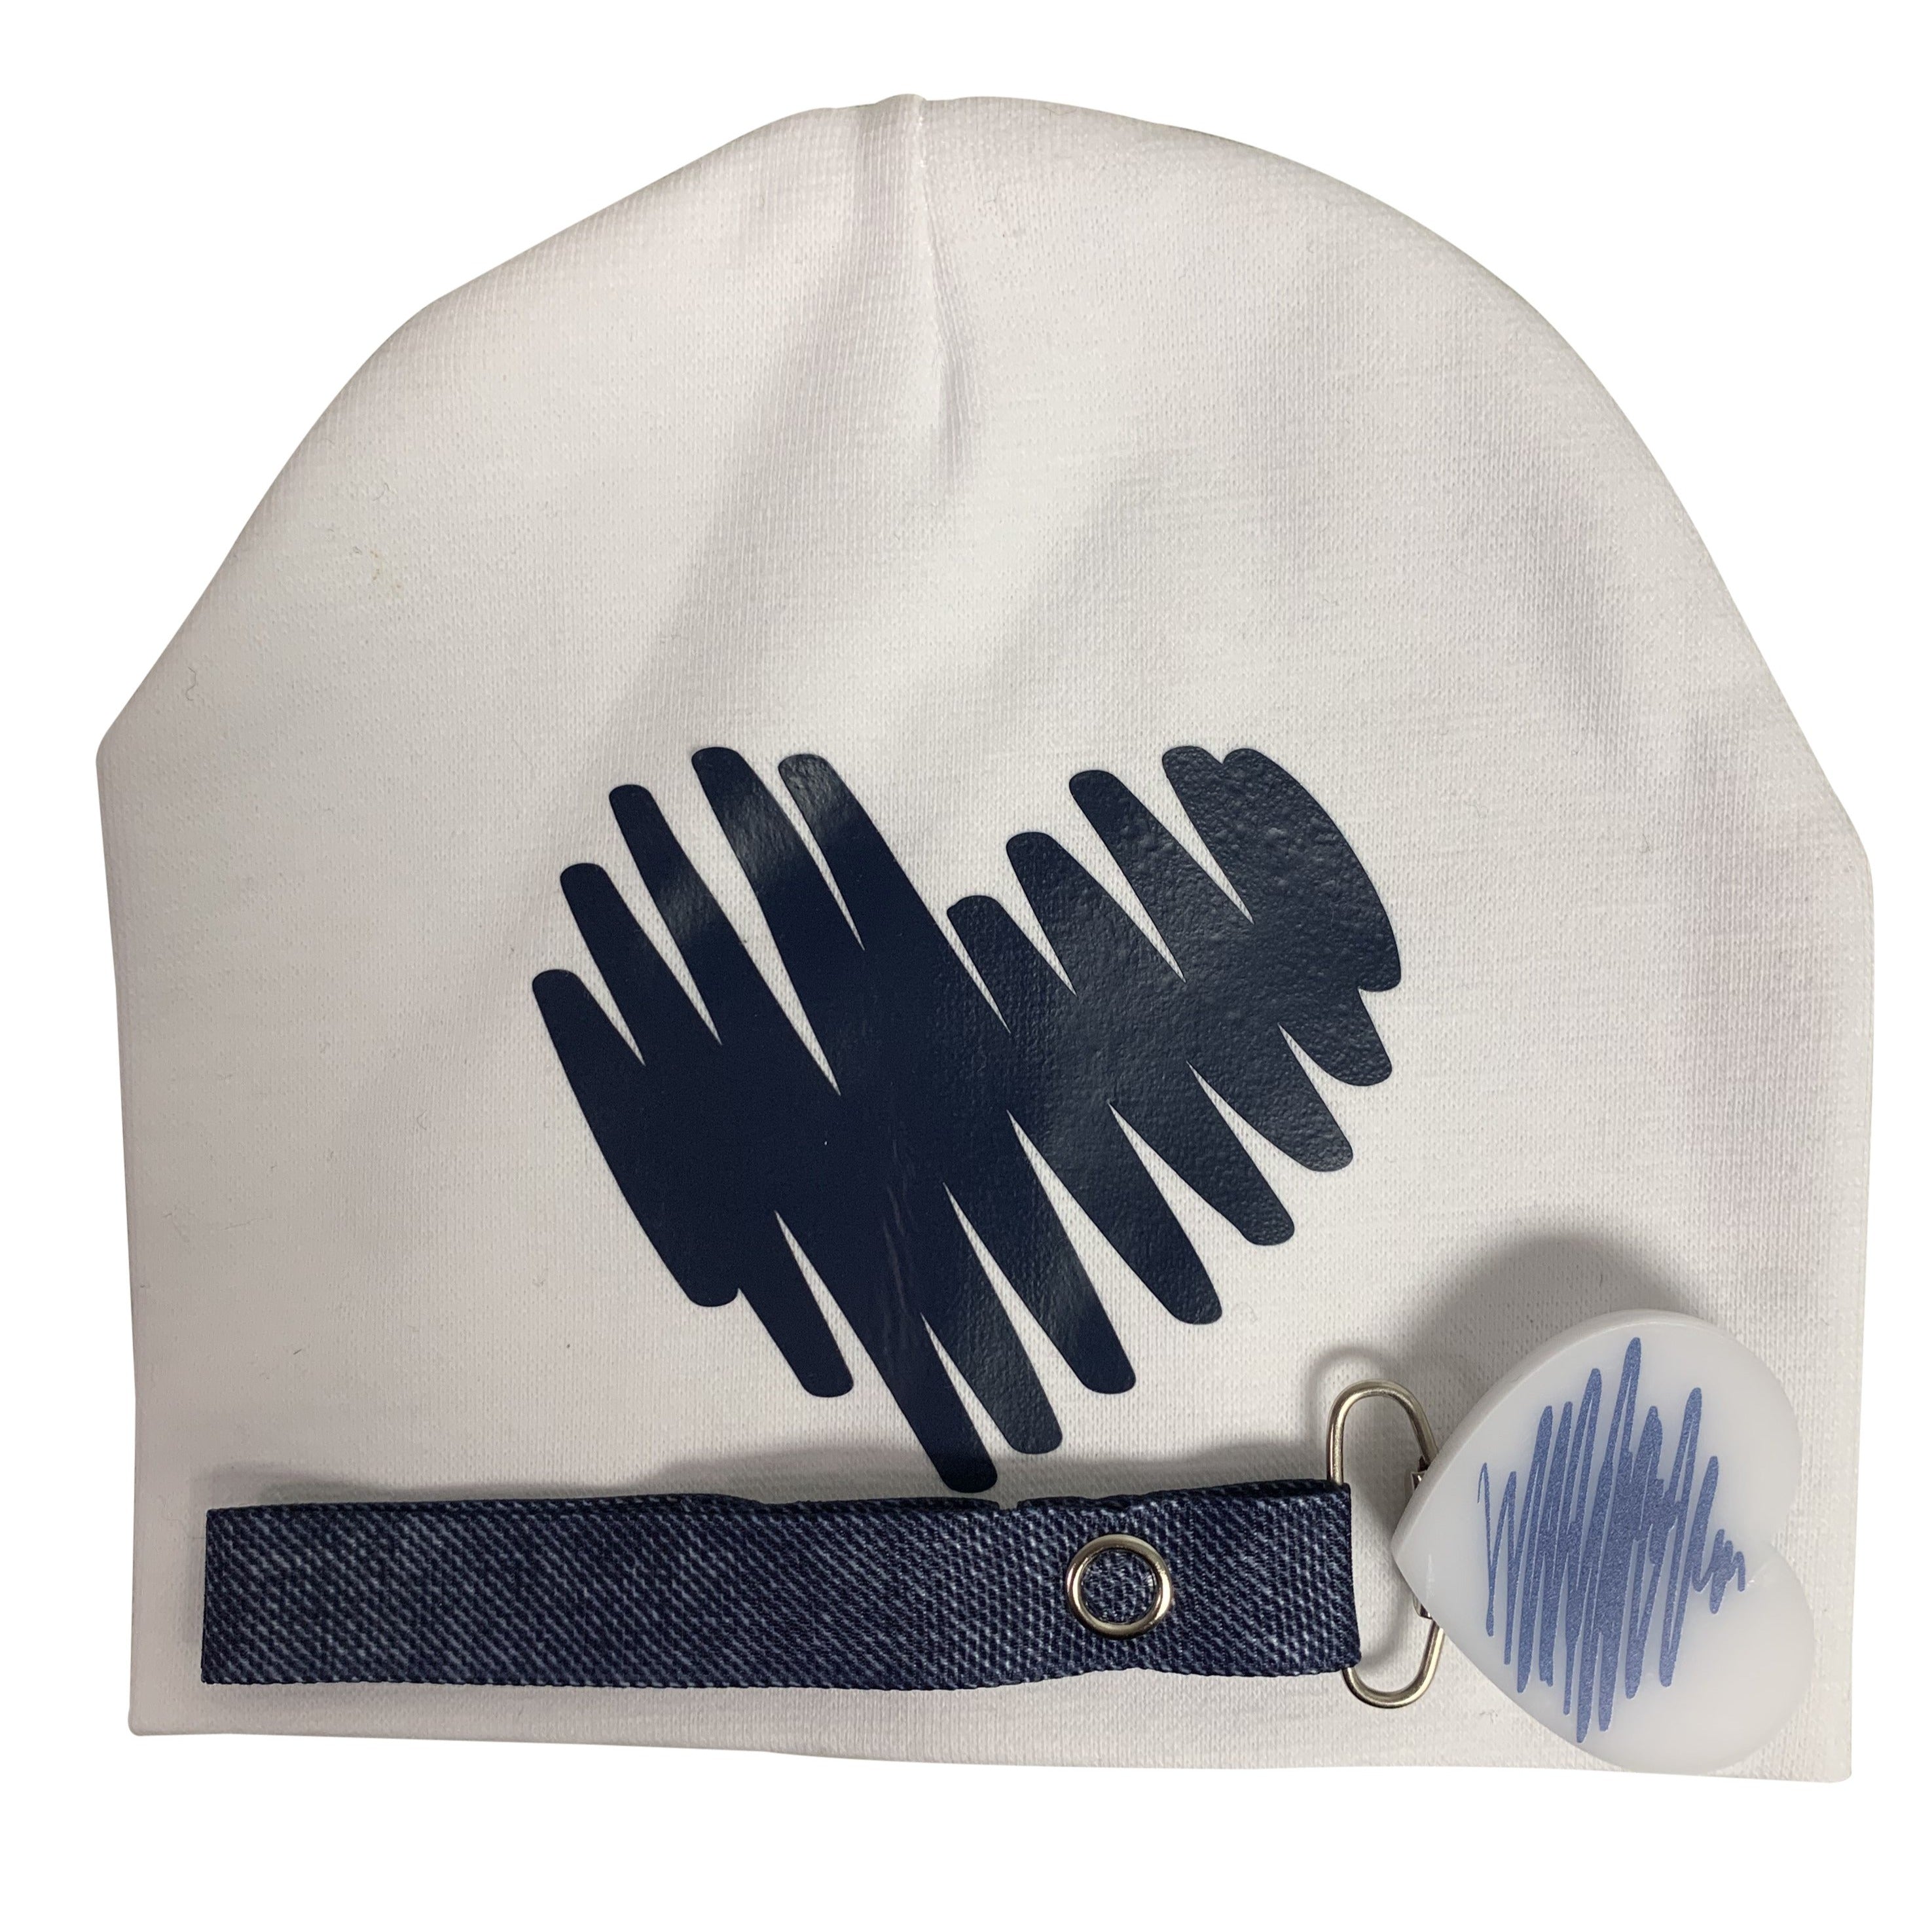 White with navy Doodle heart hat and clip GIFT SET